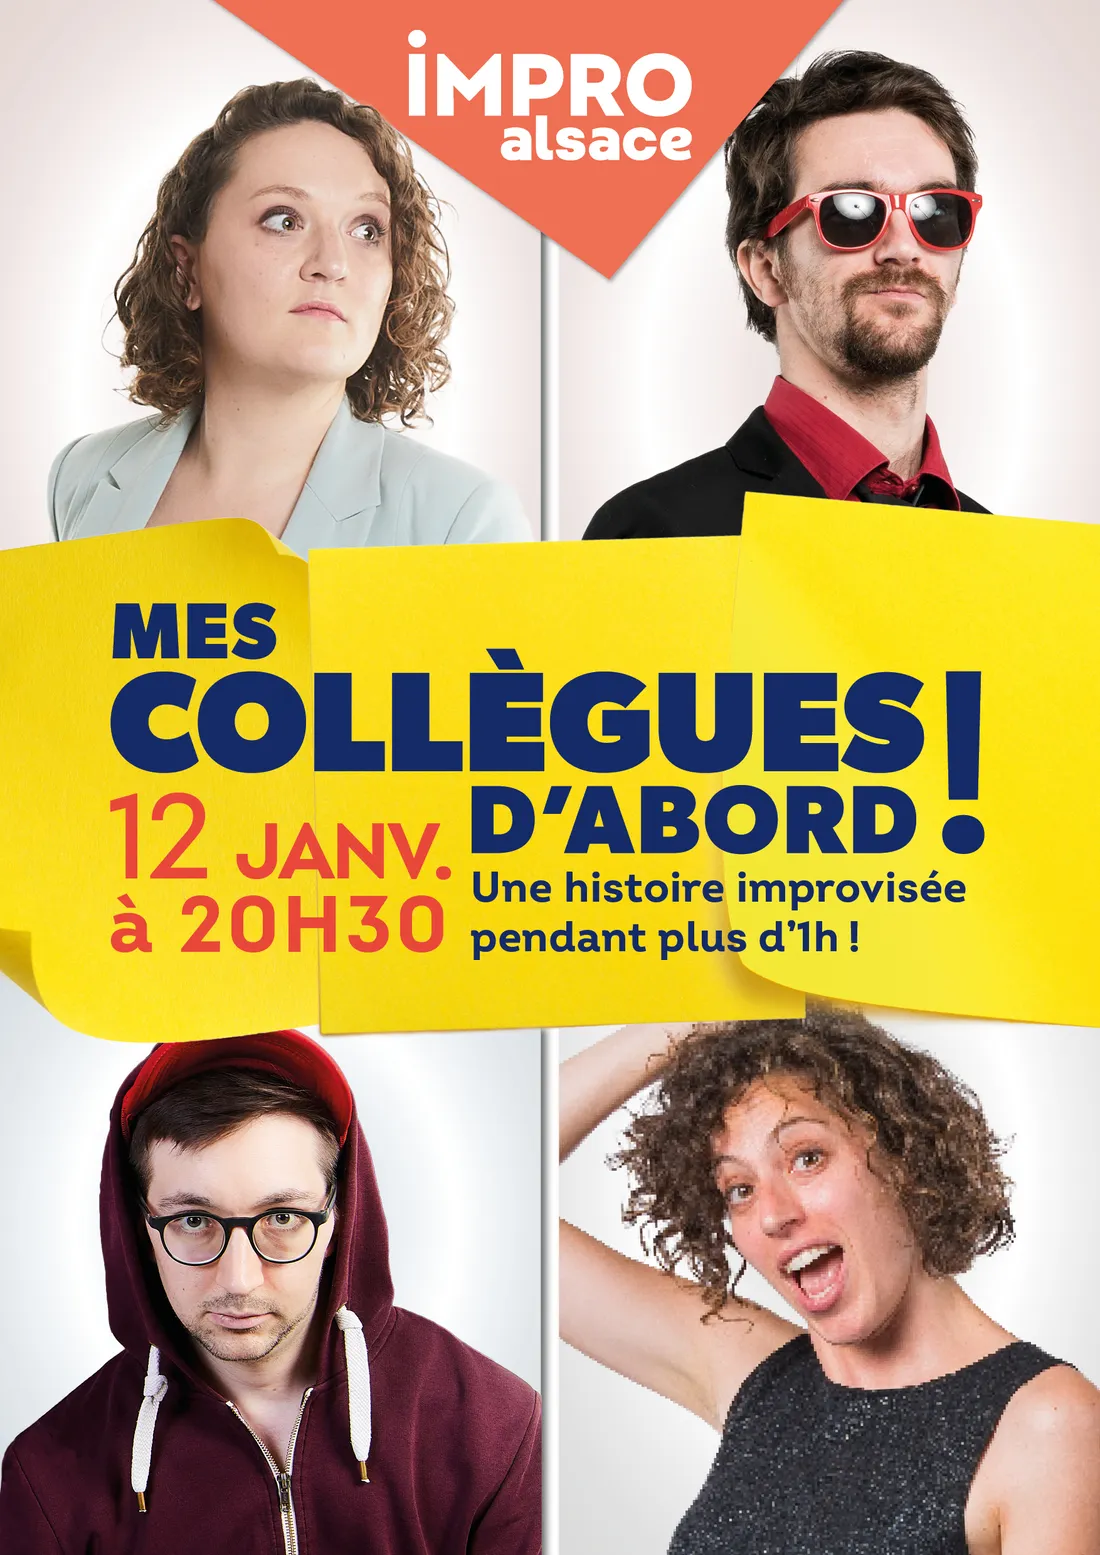 Mes Collègues d'Abord ! by IMPRO Alsace